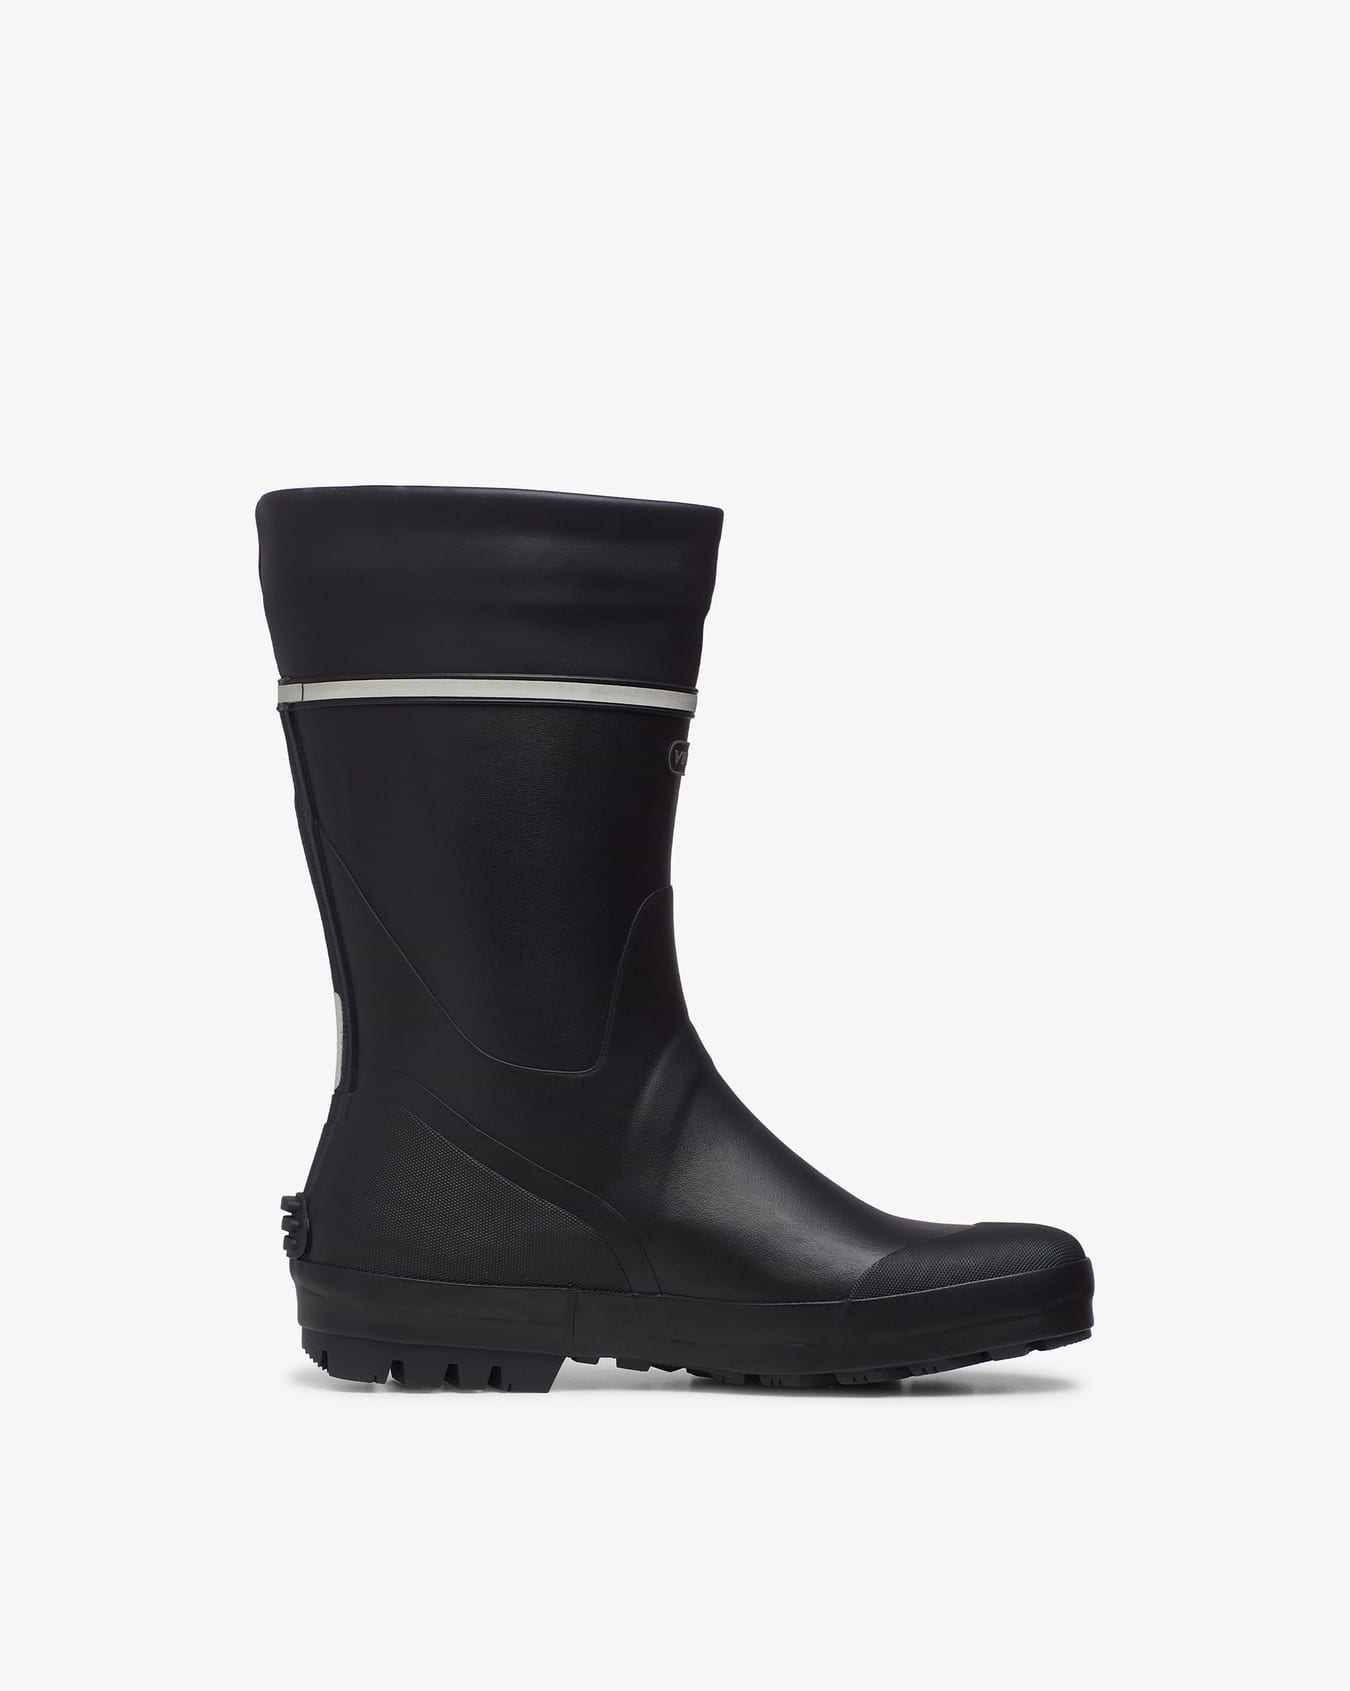 Touring 3 Black Rubber Boot